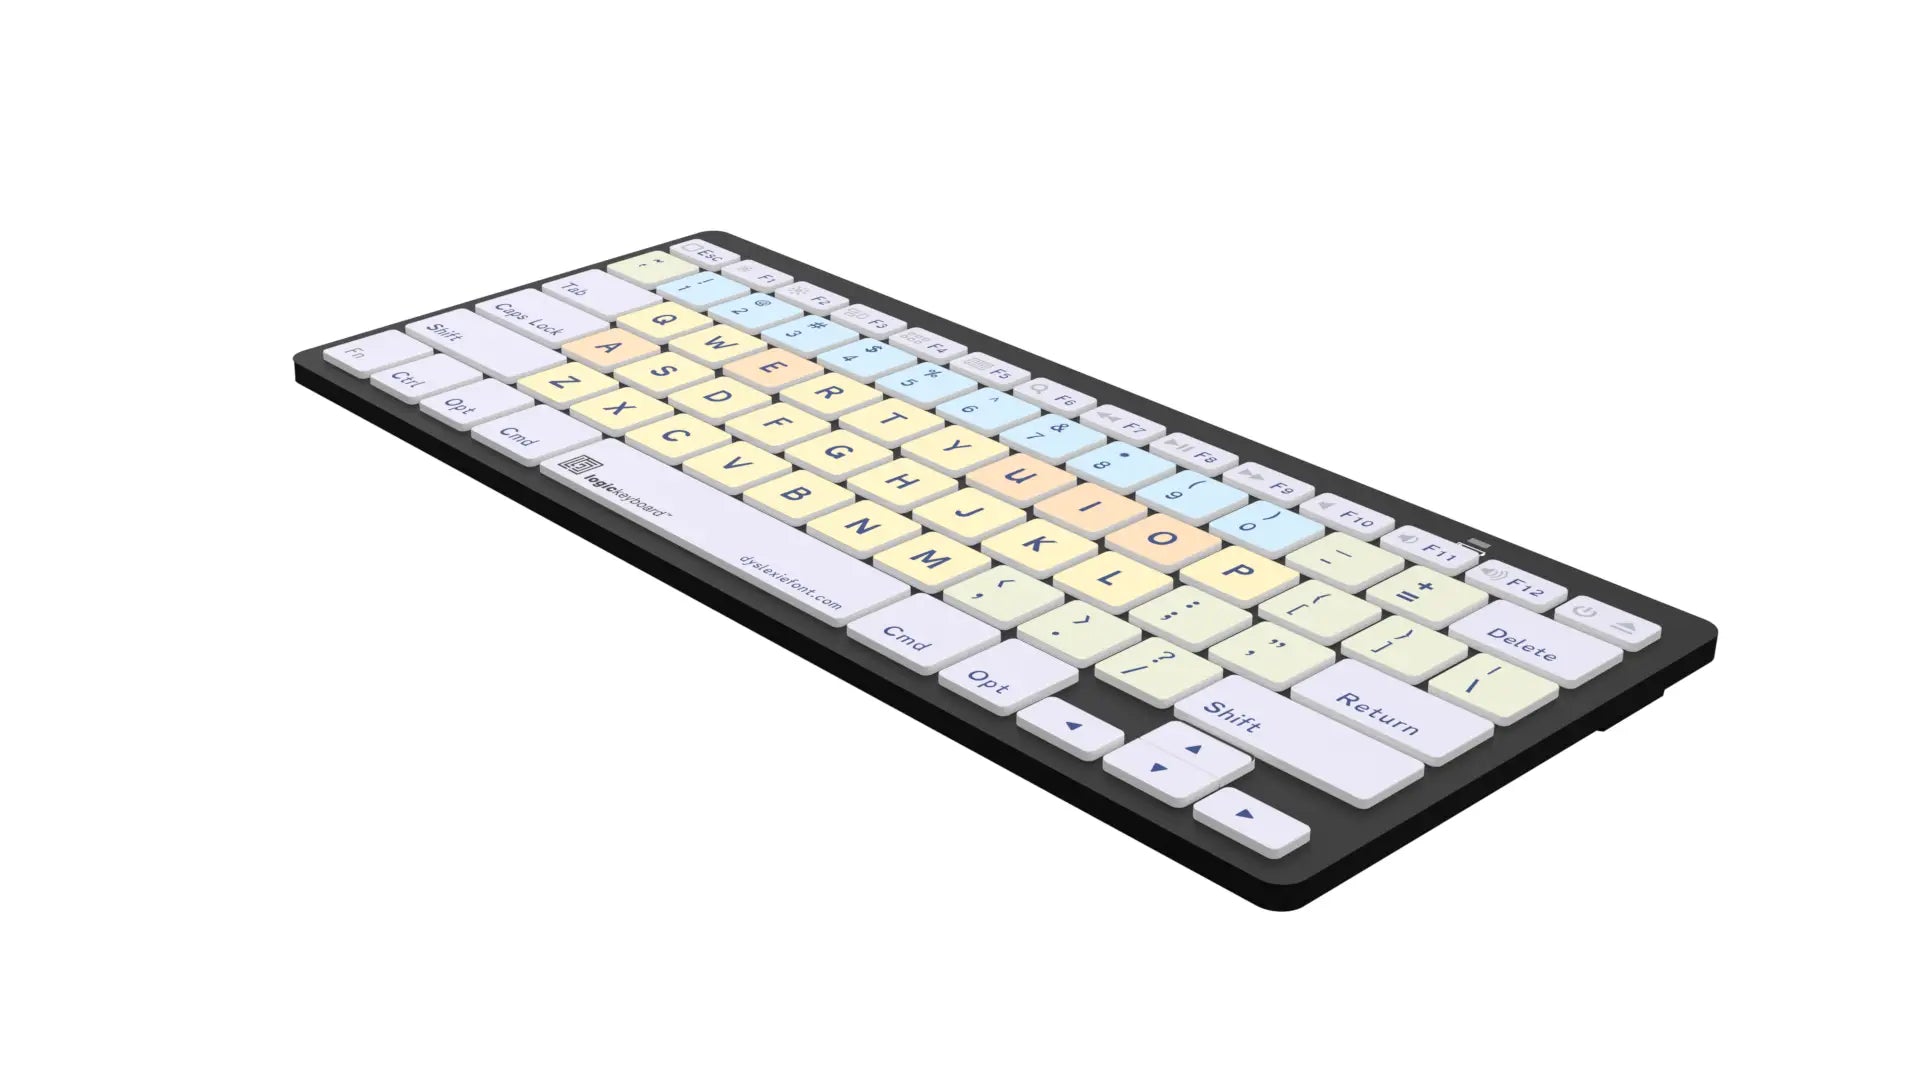 Image of the right side of the Dyslexie Mini Bluetooth Keyboard LogicKeyboard dyslexia keyboard for Mac.